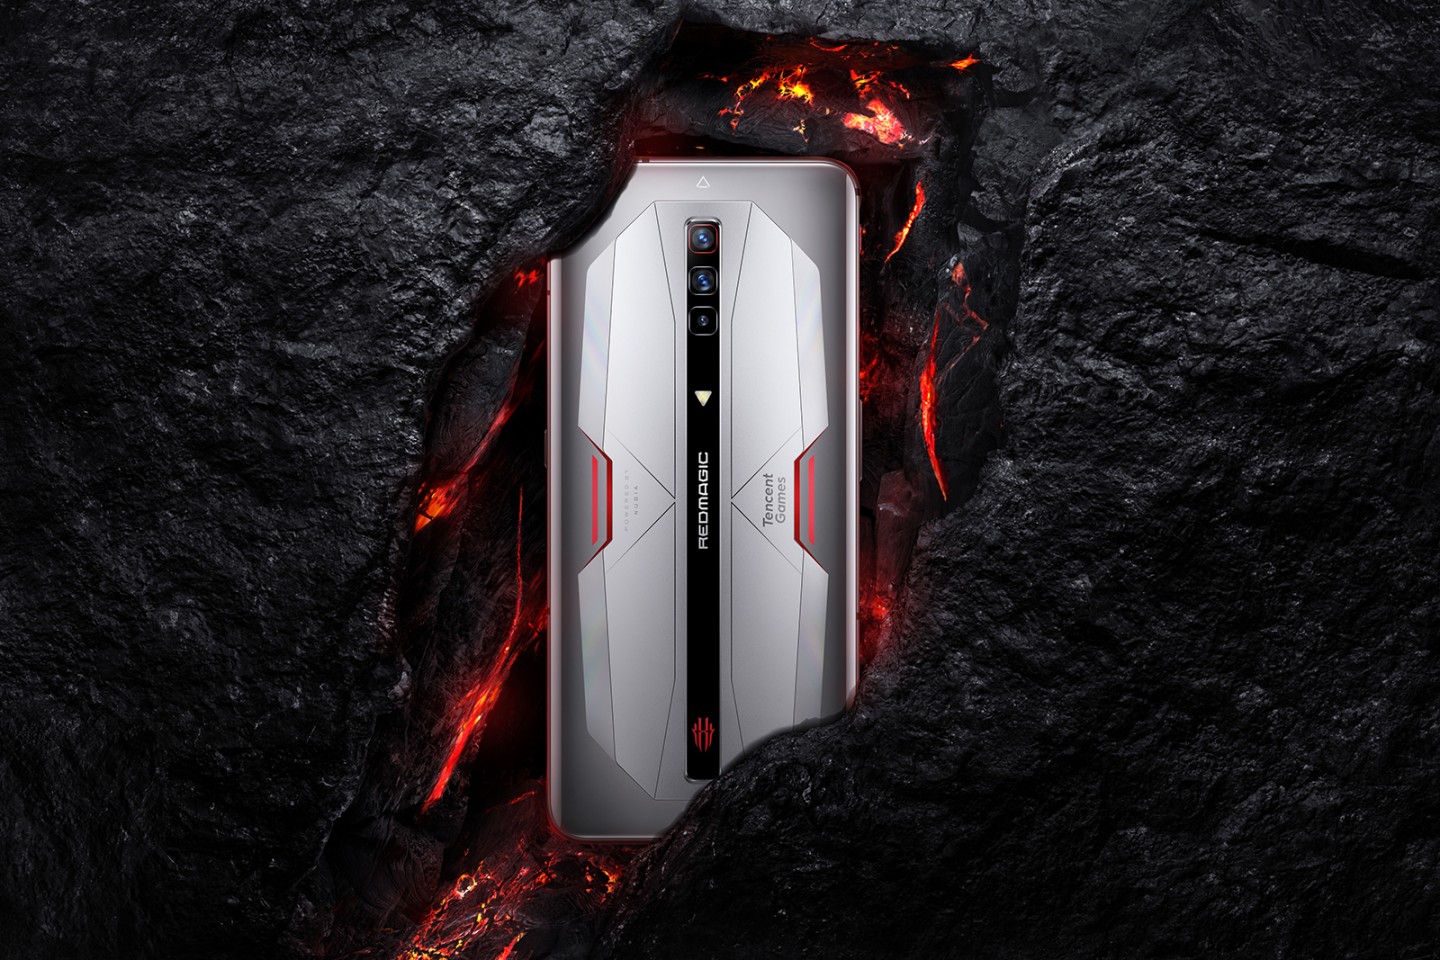 The RedMagic 6 features some advanced internal cooling to ensure smooth performance